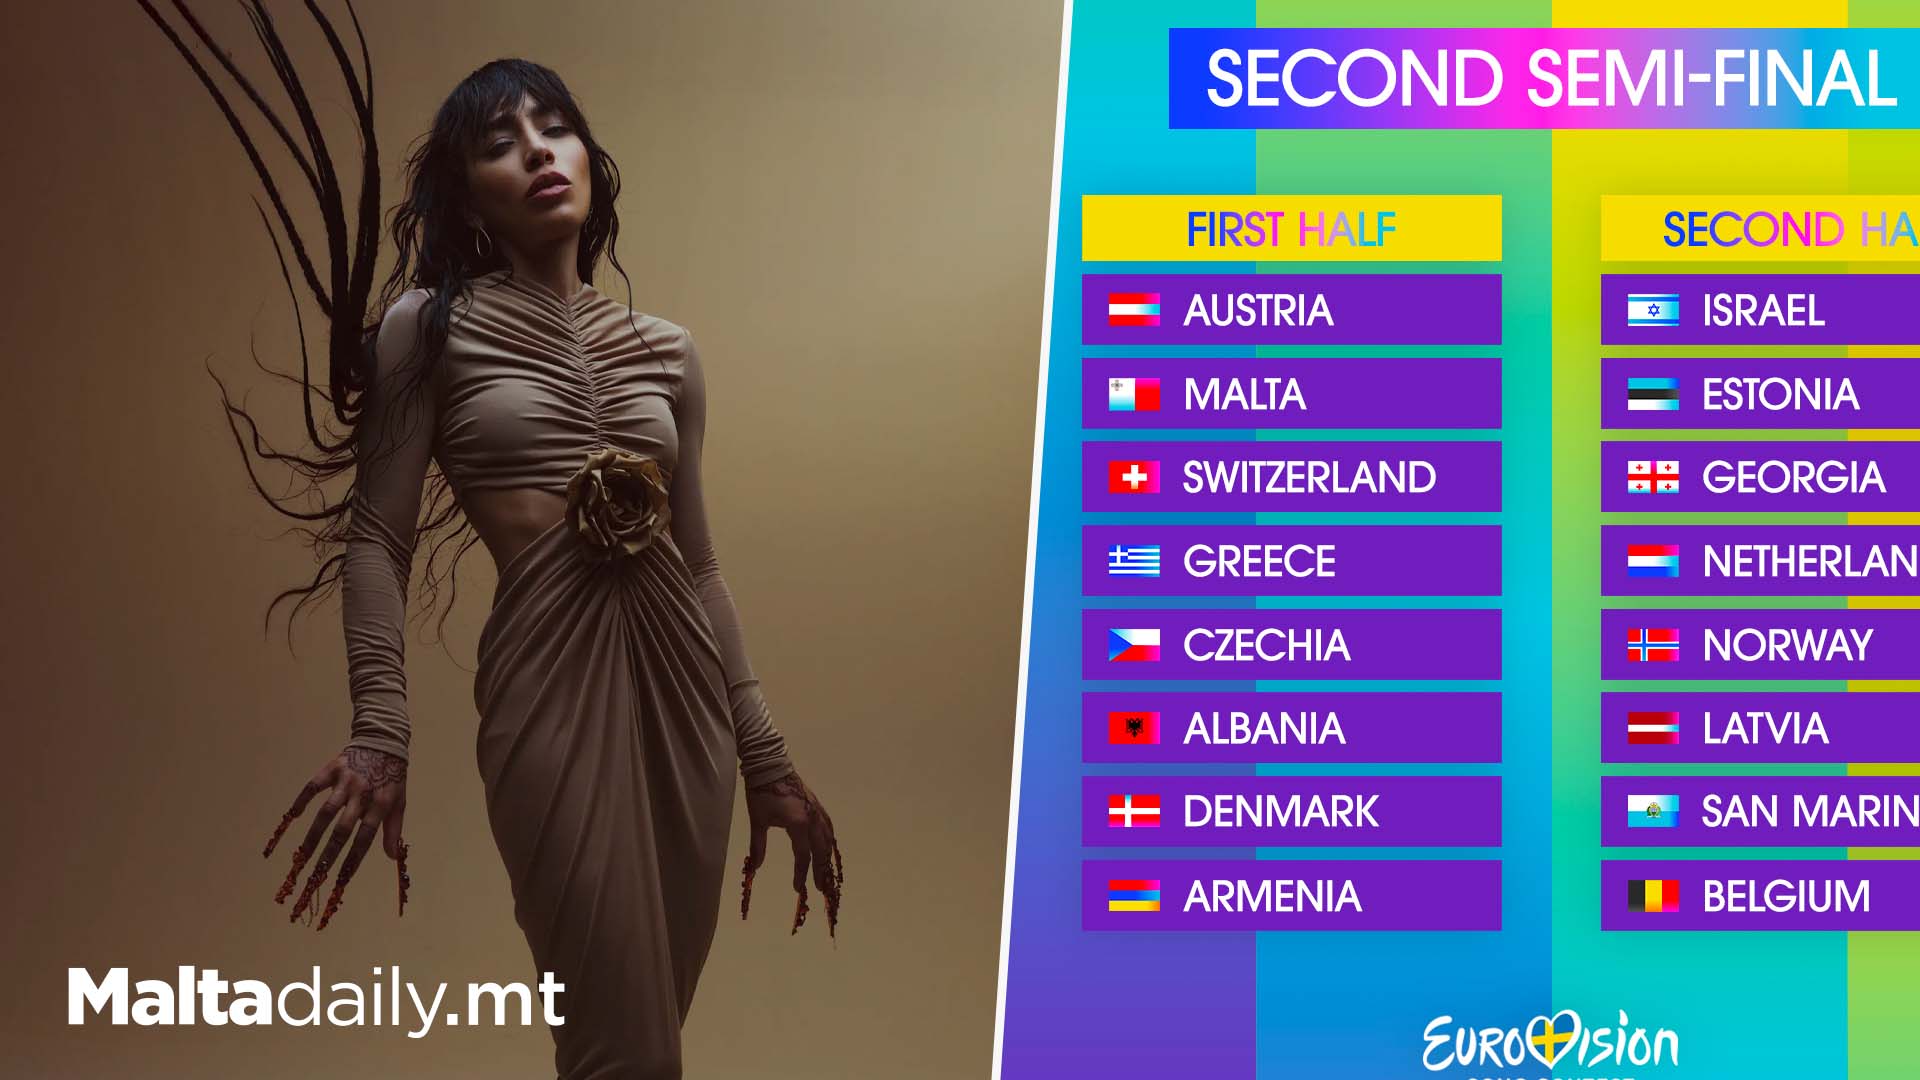 Malta To Perform In Second Place In Second Eurovision Semifinal